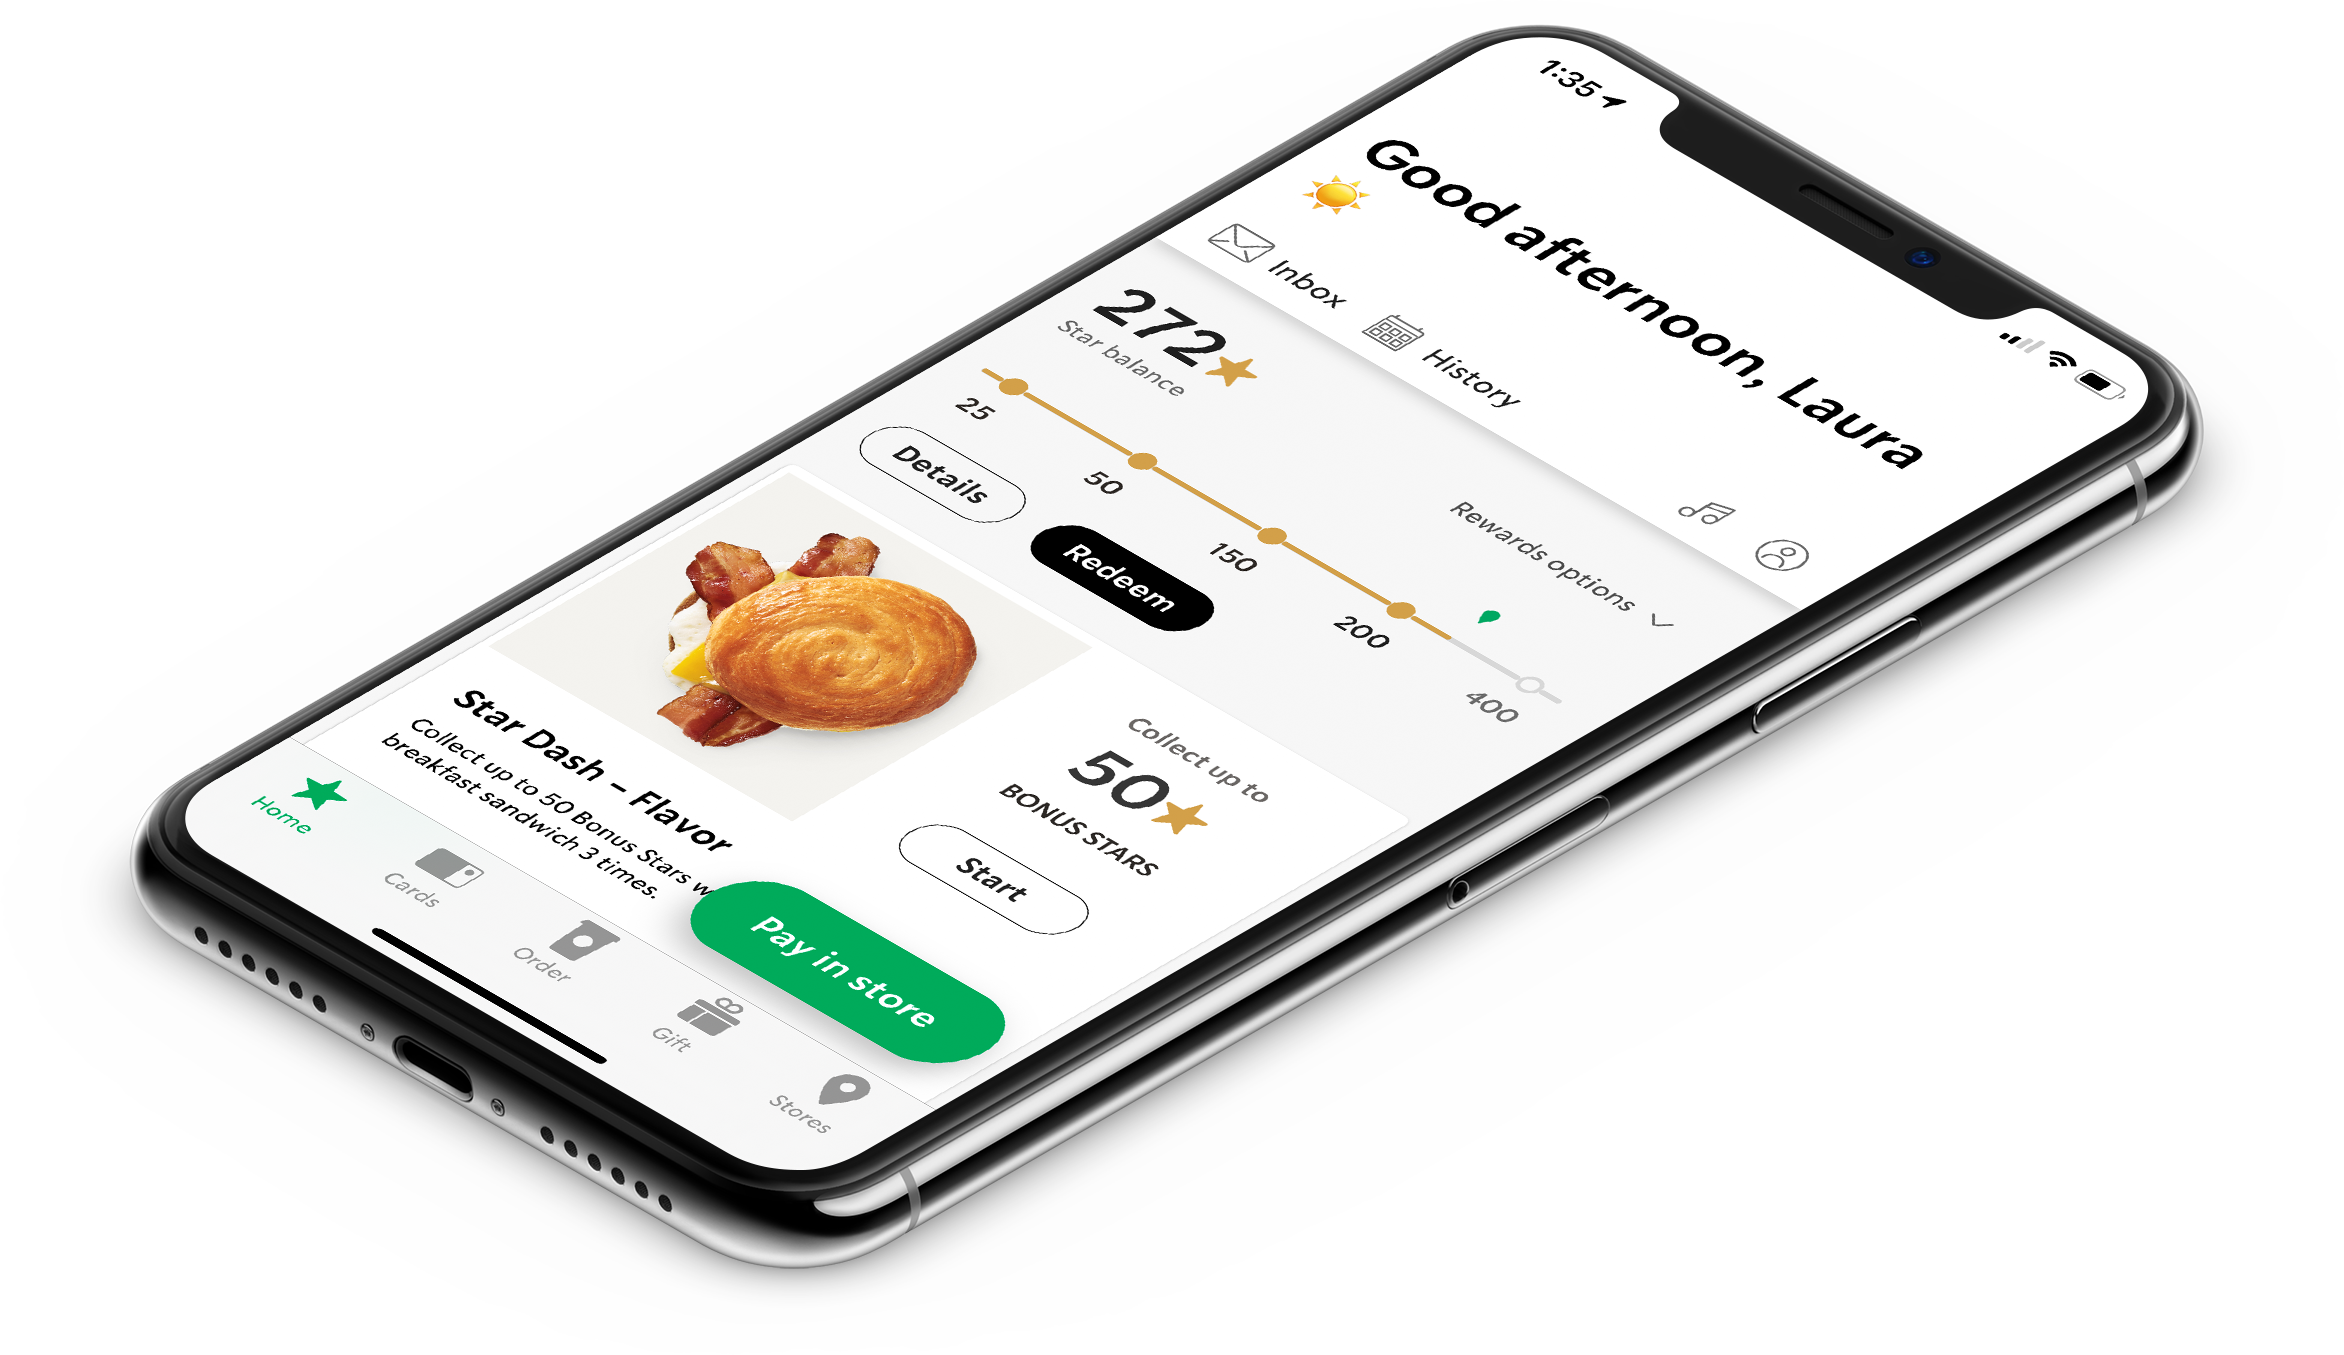 Mobile ordering and commerce